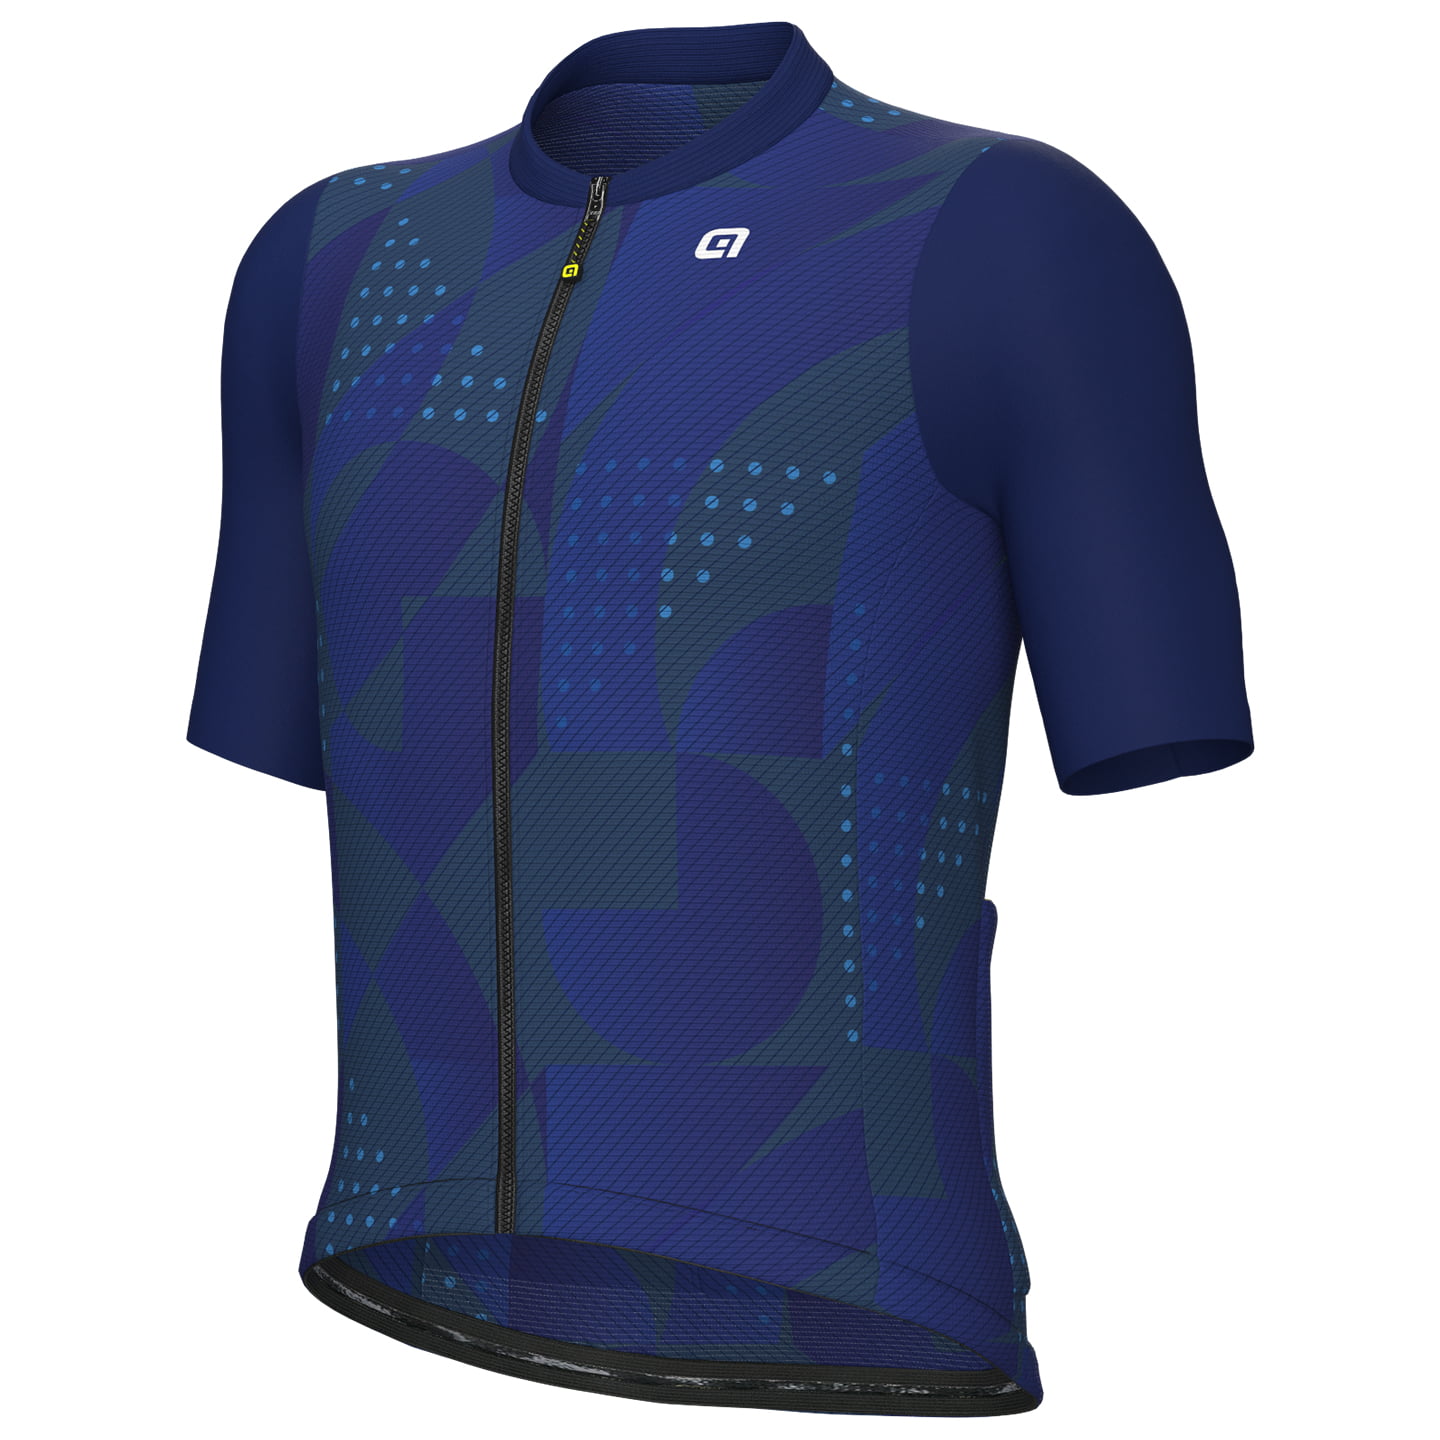 ALE Enjoy Short Sleeve Jersey, for men, size 2XL, Cycling jersey, Cycle clothing